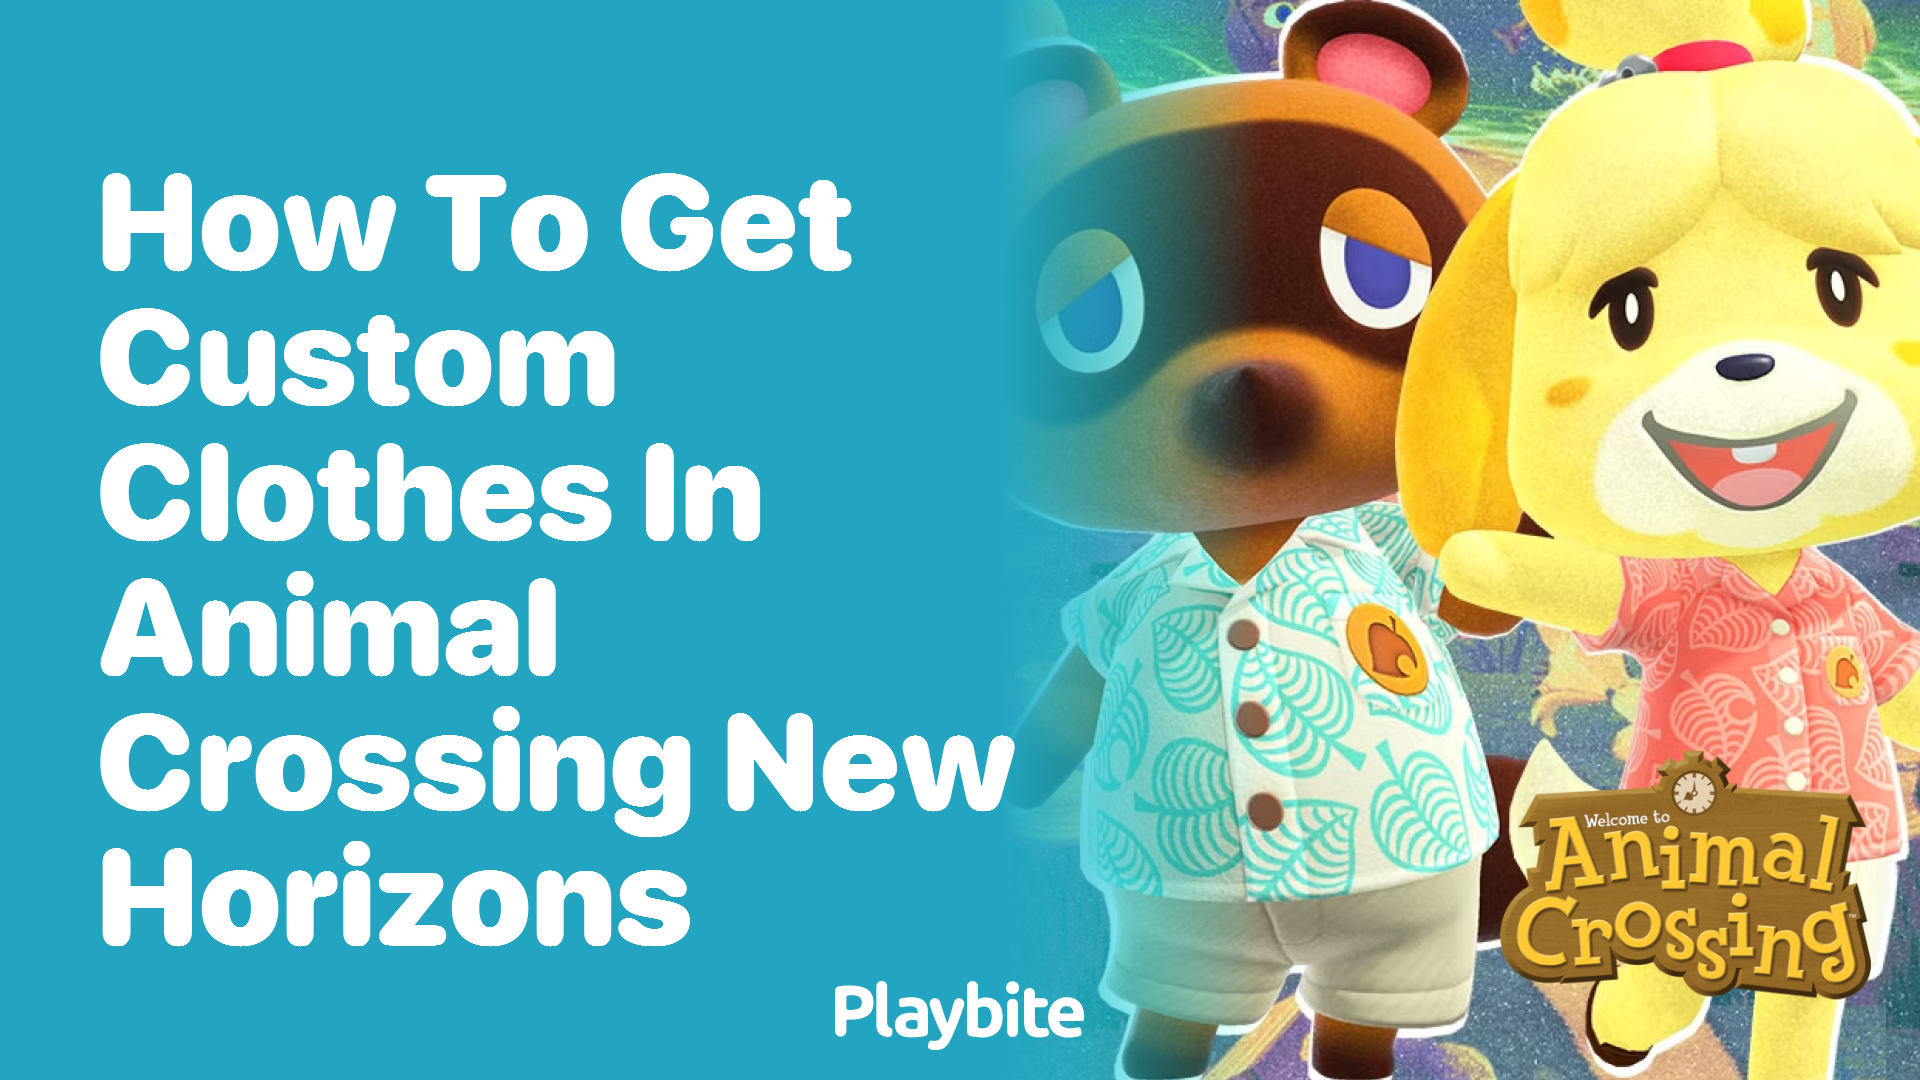 How to Get Custom Clothes in Animal Crossing: New Horizons